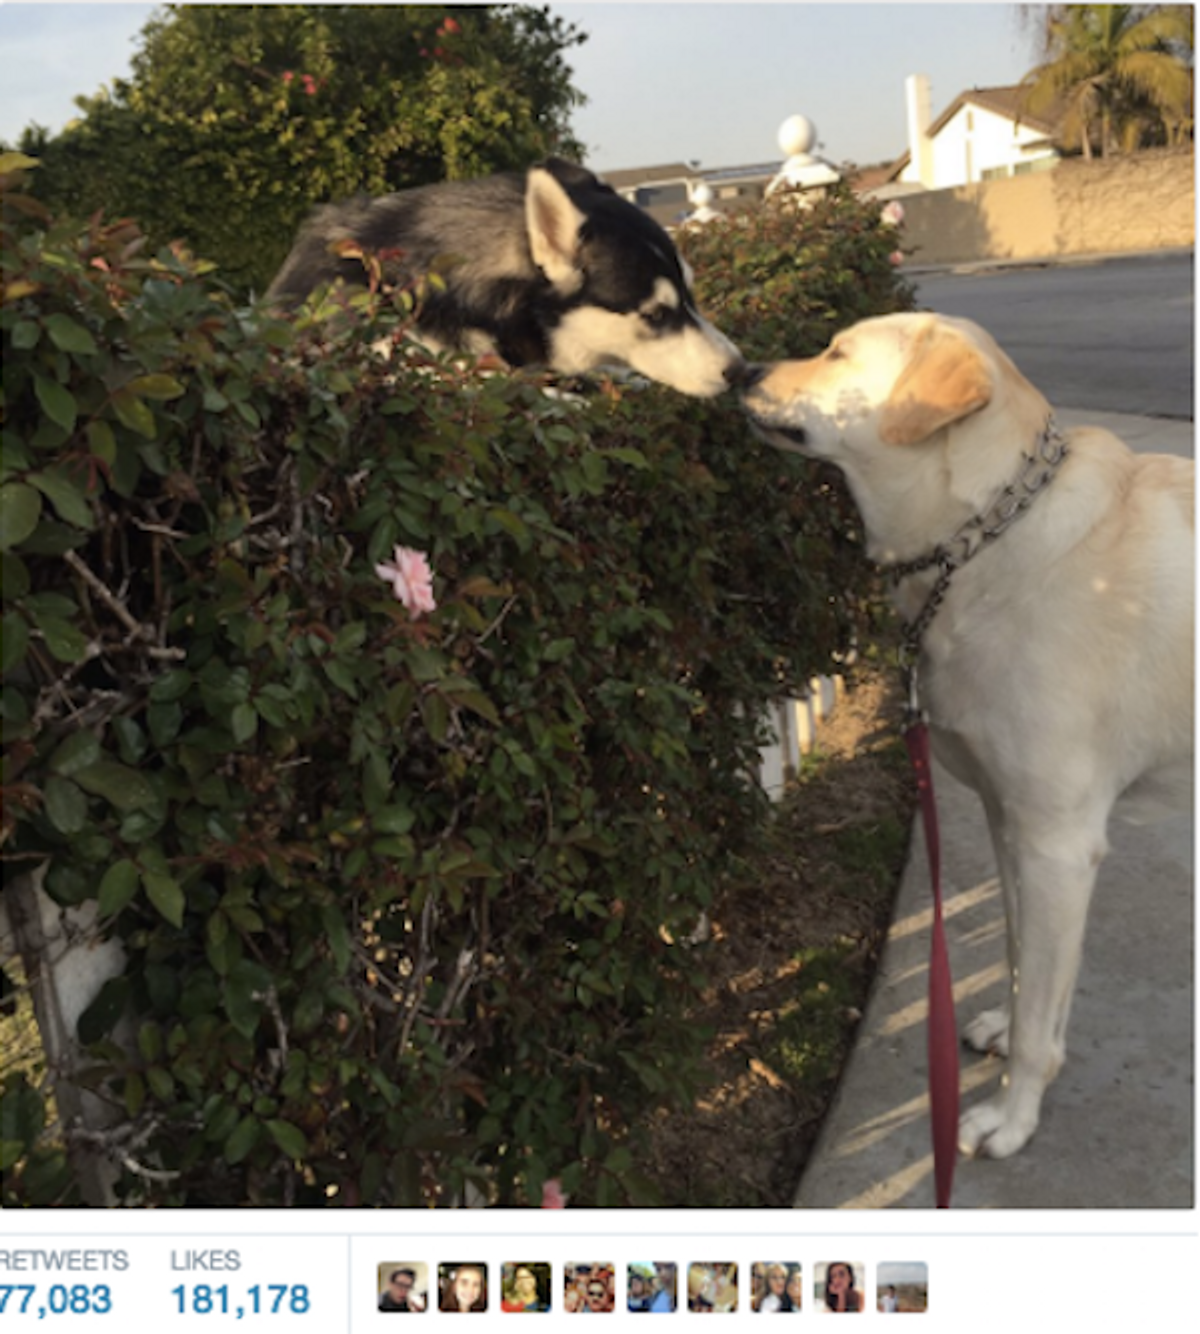 Today In Twitter Virality: 2 Dogs Kissing